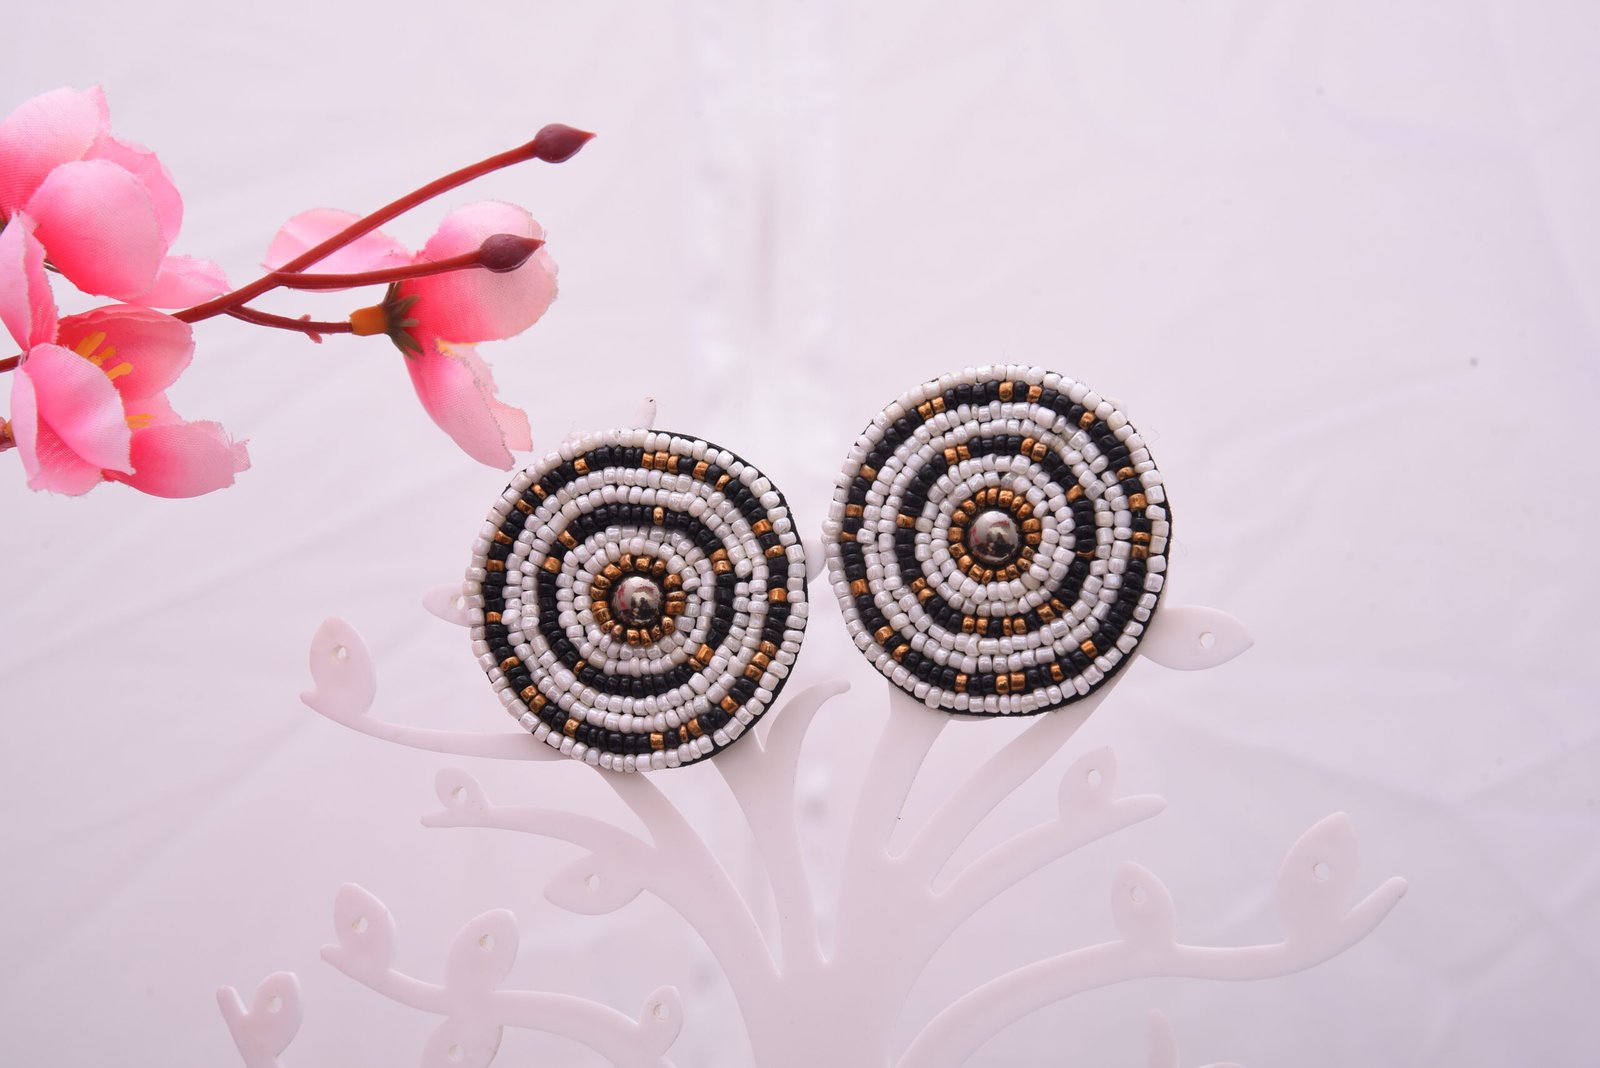 The Chequered Beads Studs Earrings